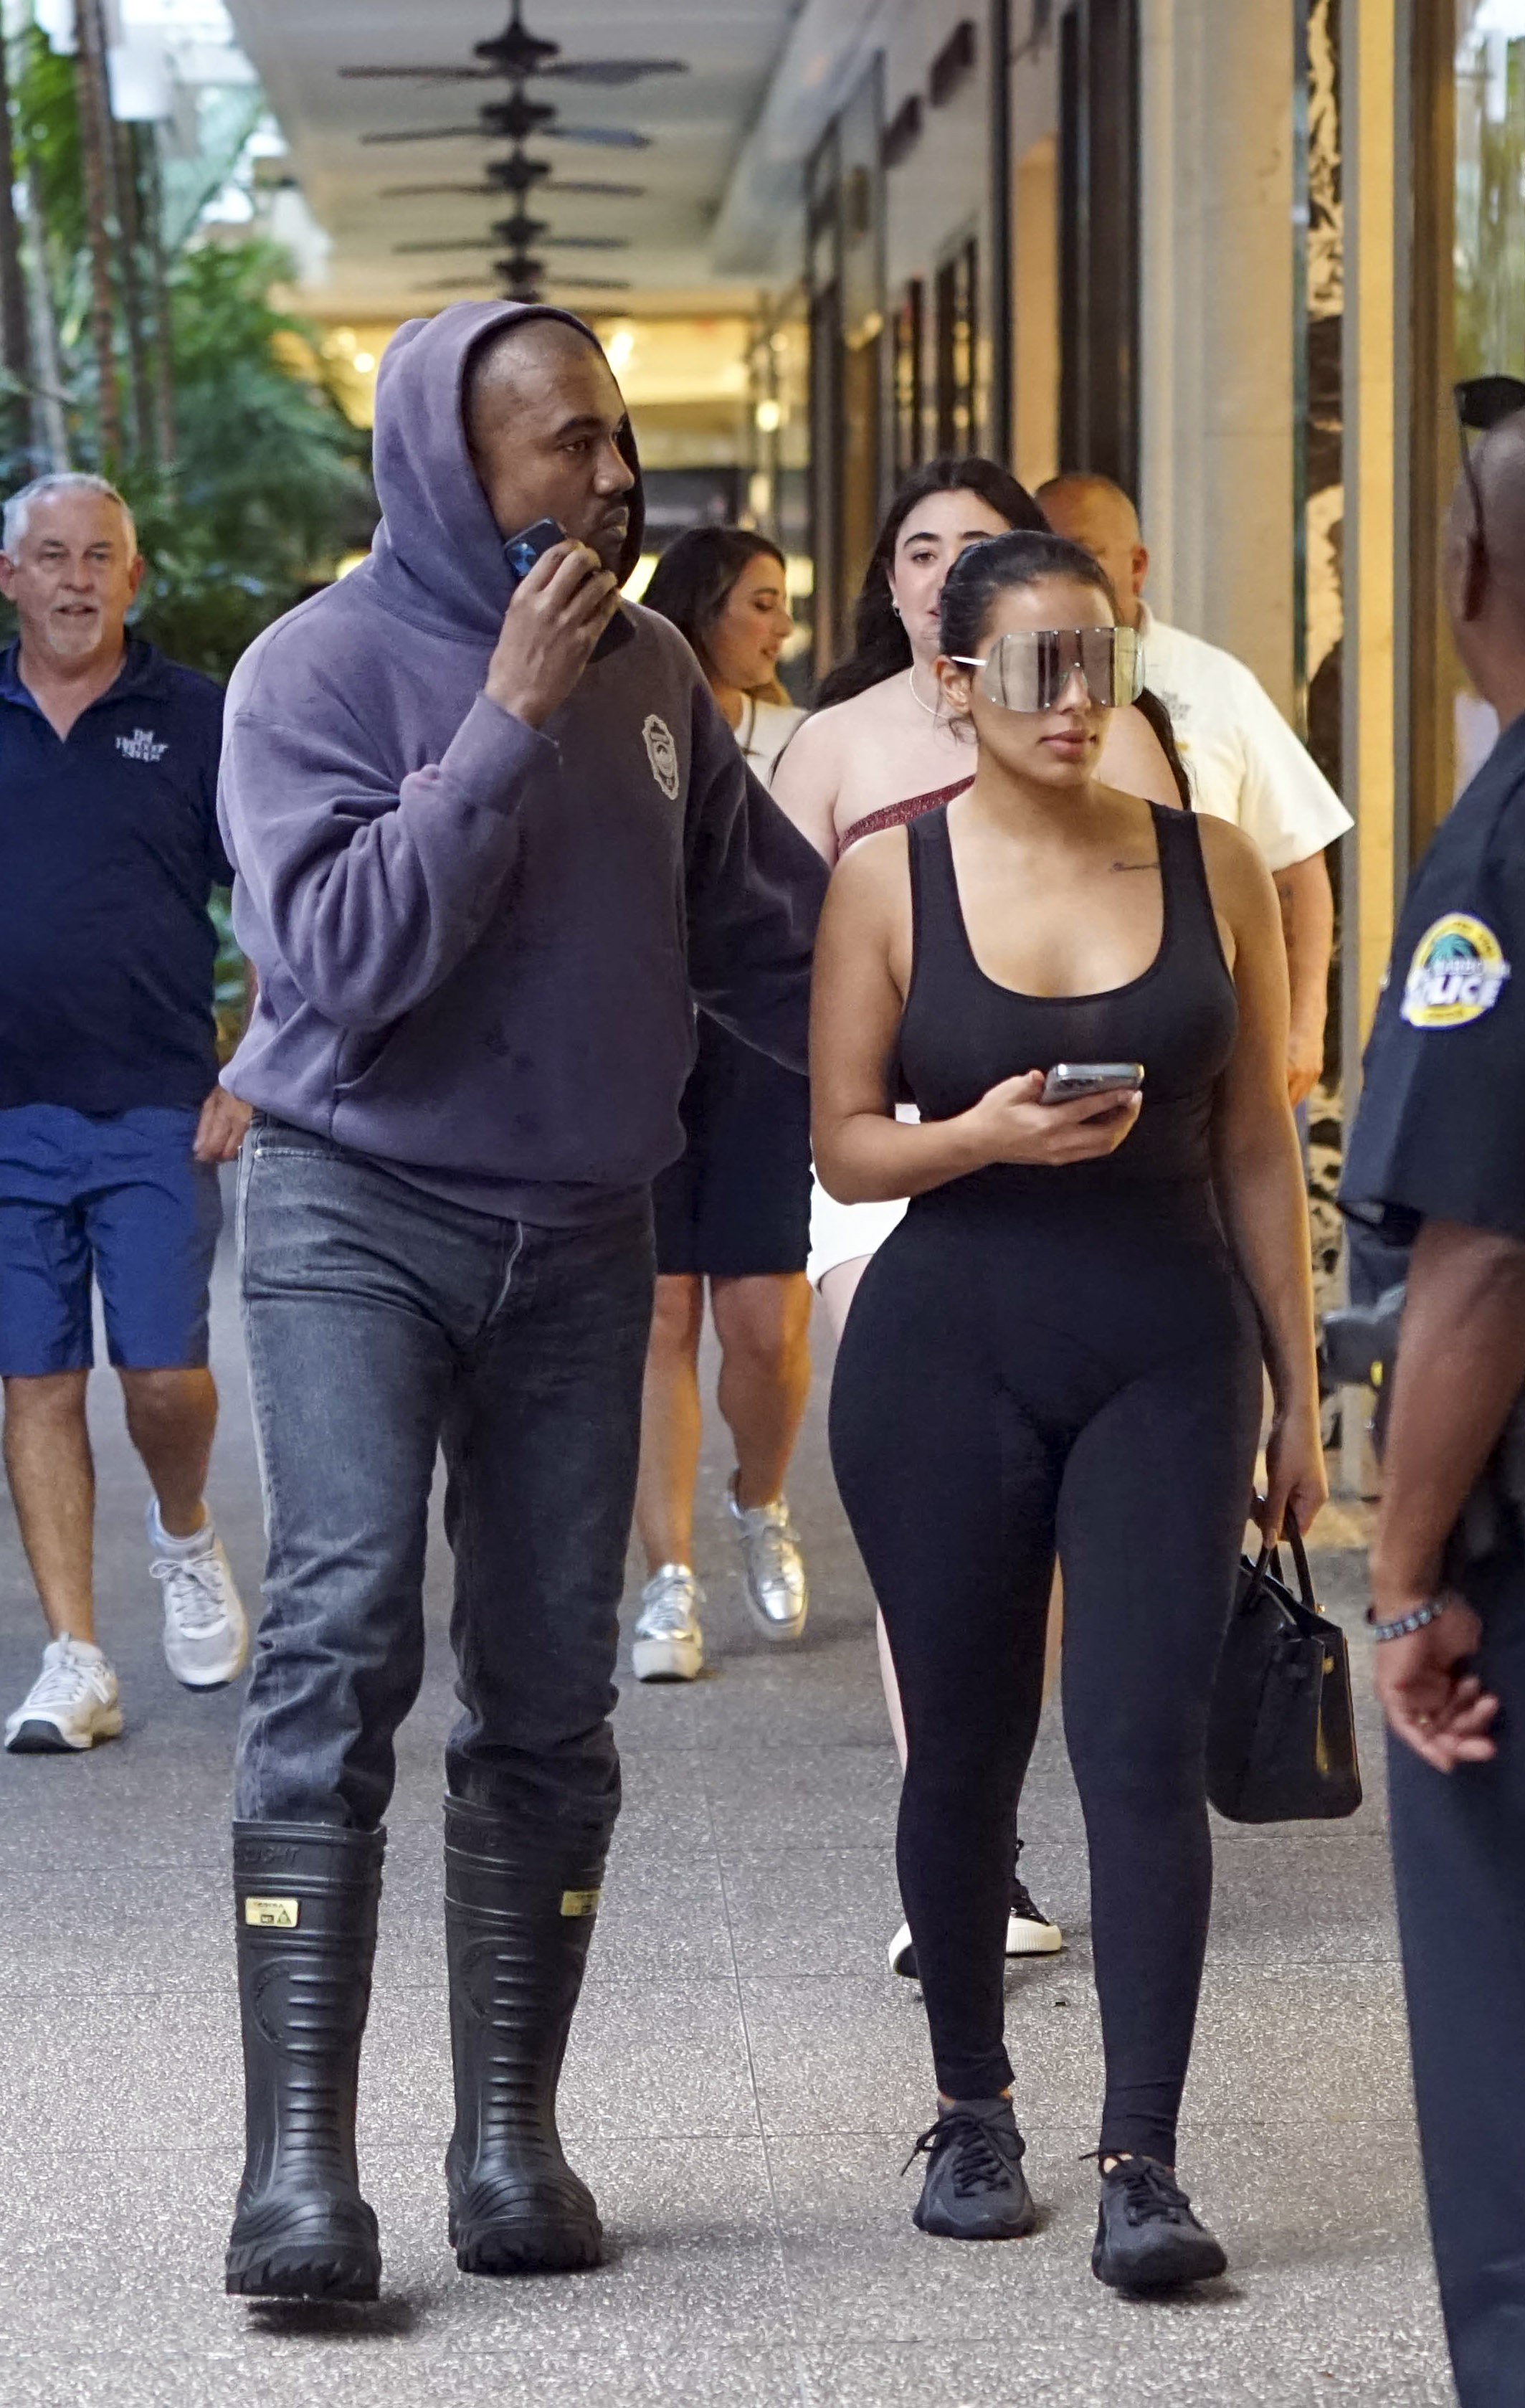 Photo © 2022 Luis Fernandez/The Grosby GroupEXCLUSIVE Miami, February 24, 2022Kanye West is treating his new girlfriend Chaney Jones to some food and shopping at Miami's Bal Harbour. We caught Kanye taking a phone call while walking alongside his new b (Foto: Luis Fernandez/The Grosby Group)